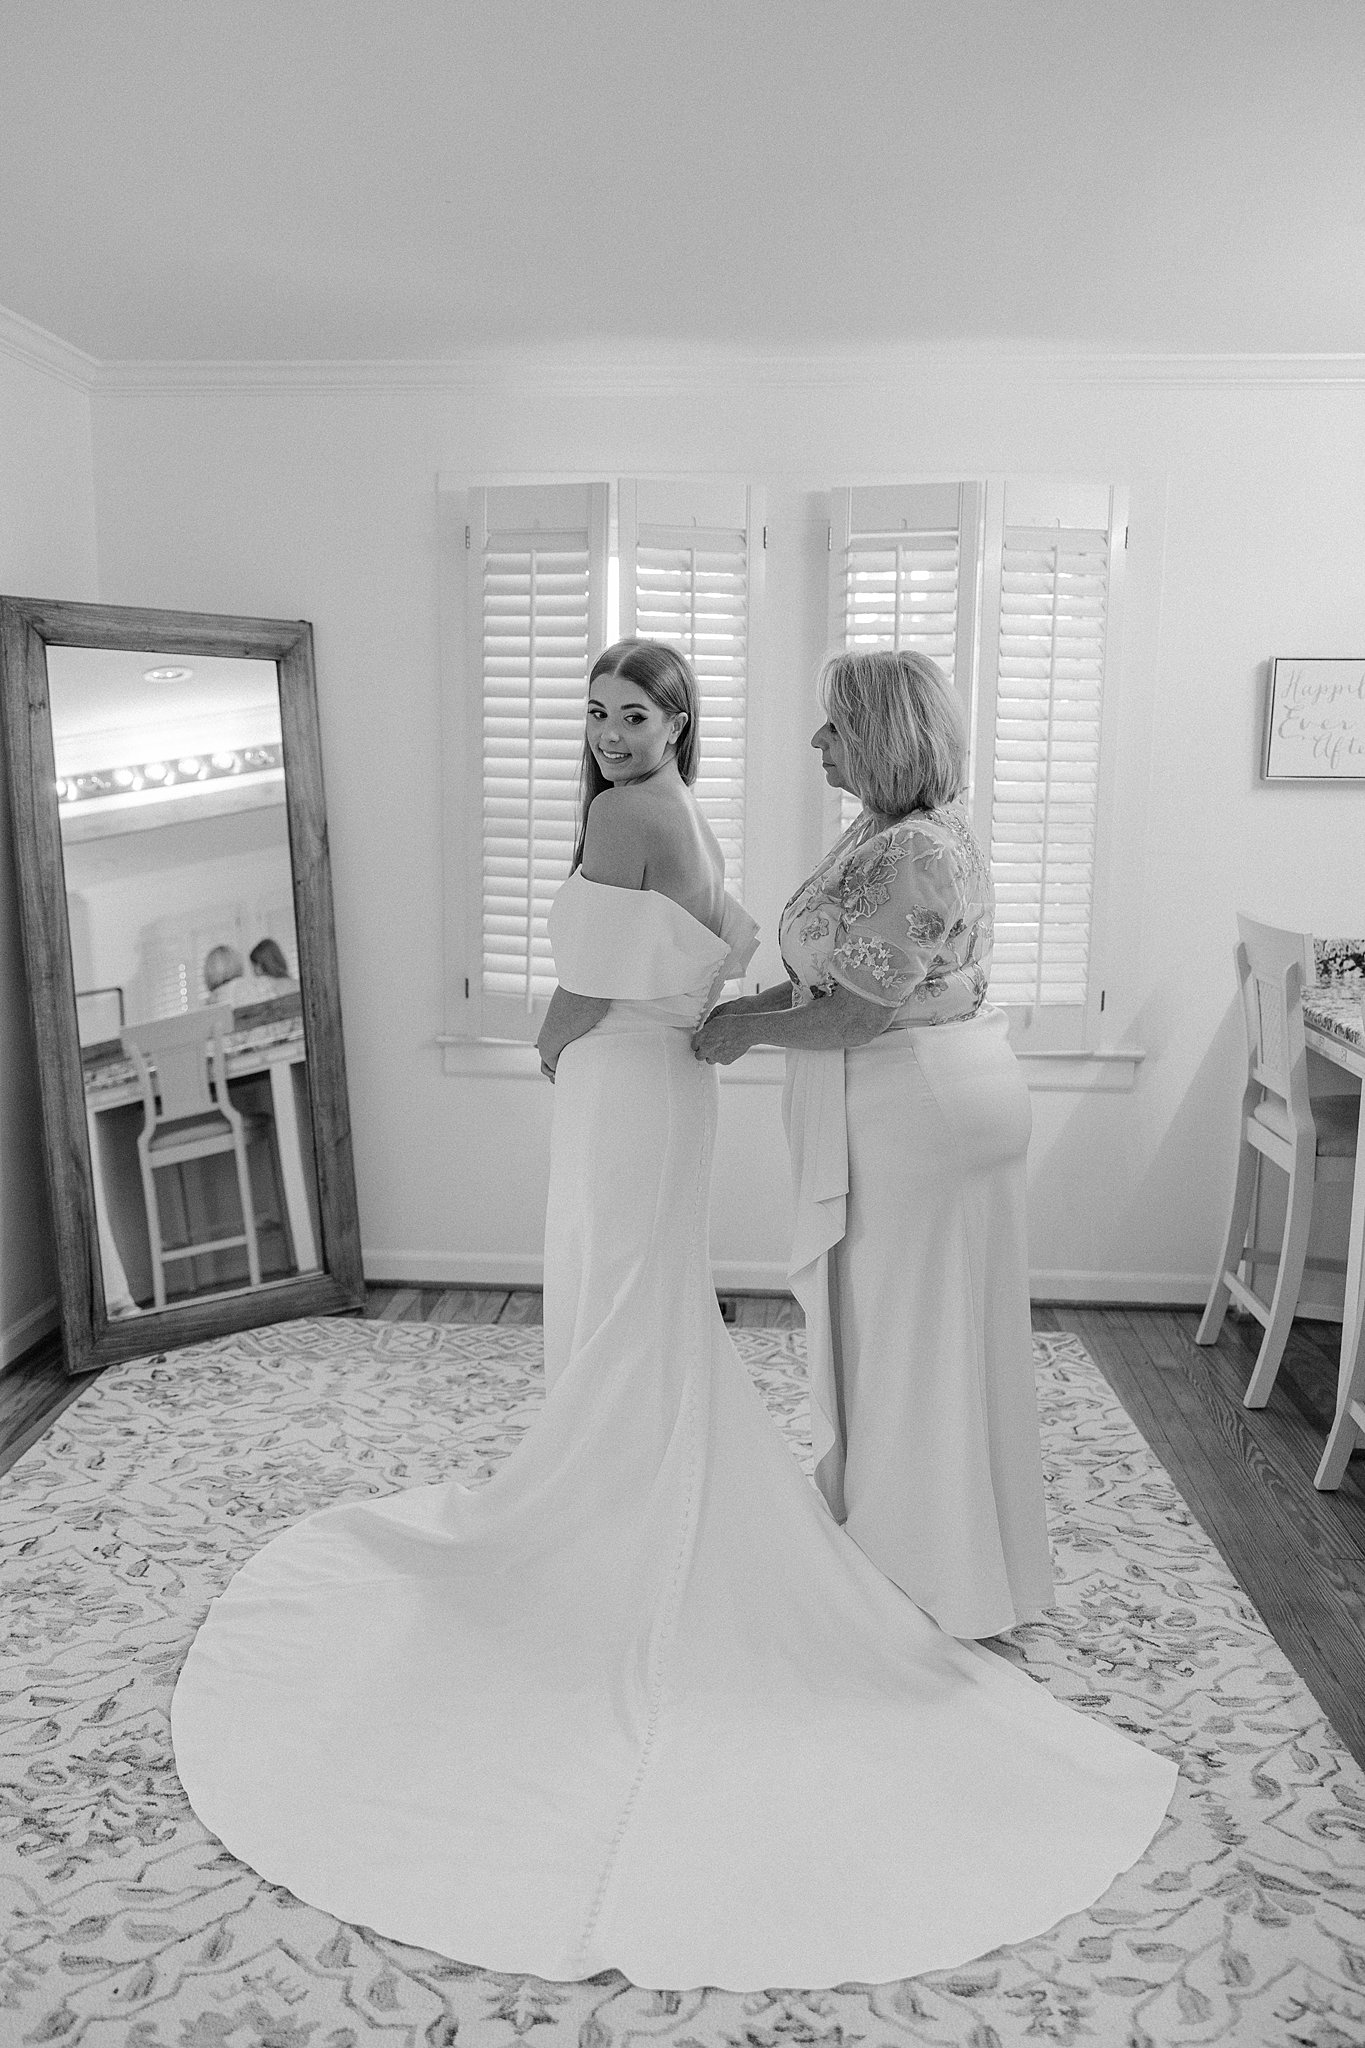 A mother helps zip up her daughter's wedding dress while standing in front of a mirror